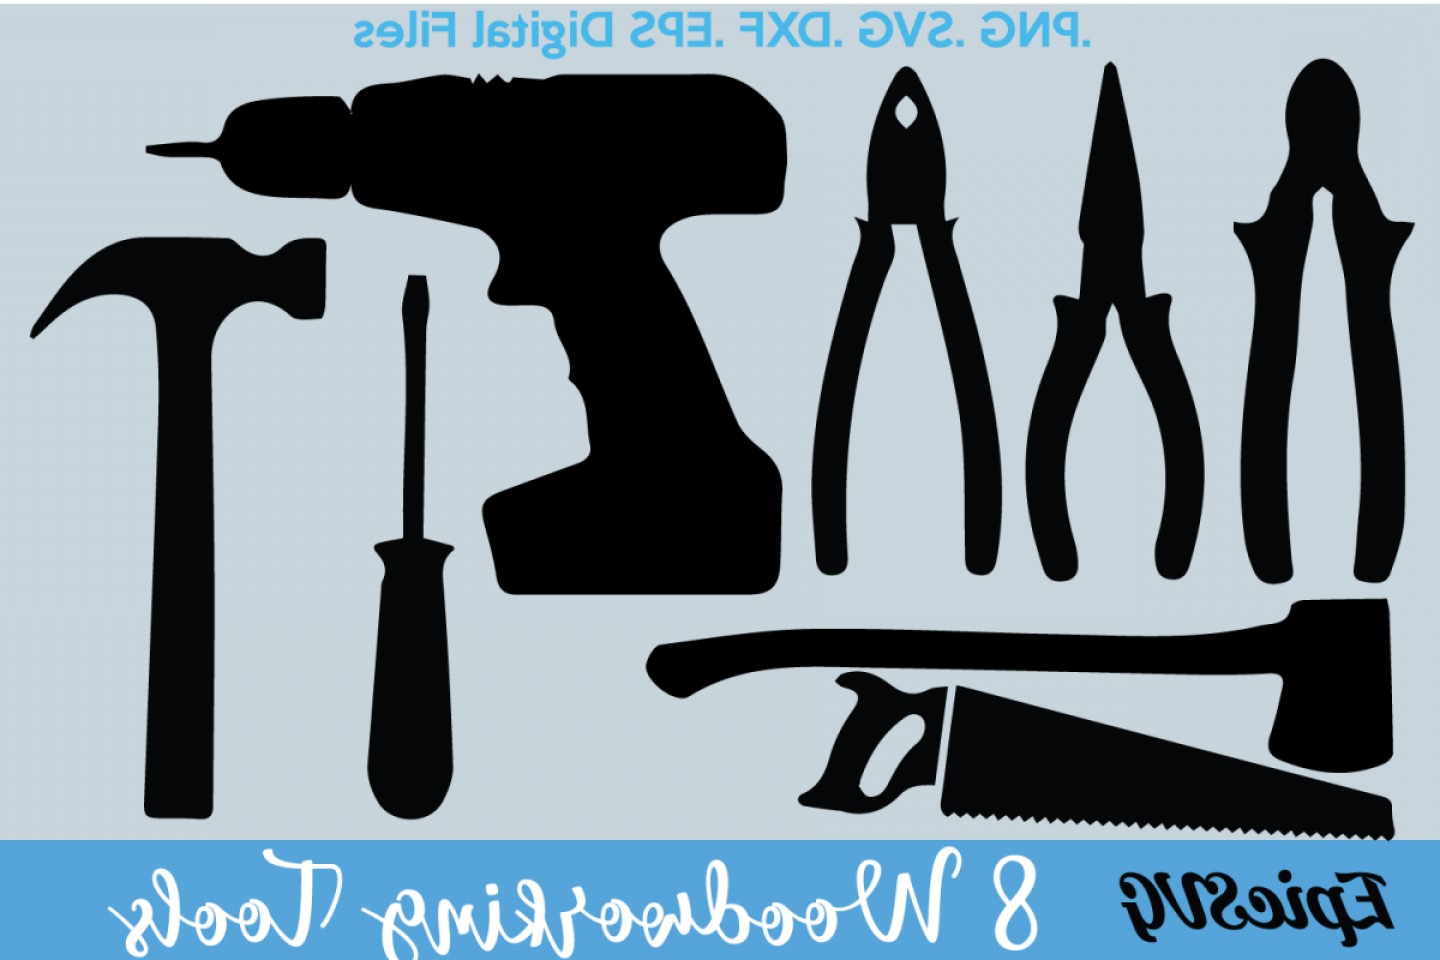 Woodworking Tools Svg Dxf Clipart Vector Graphic Tools Saw